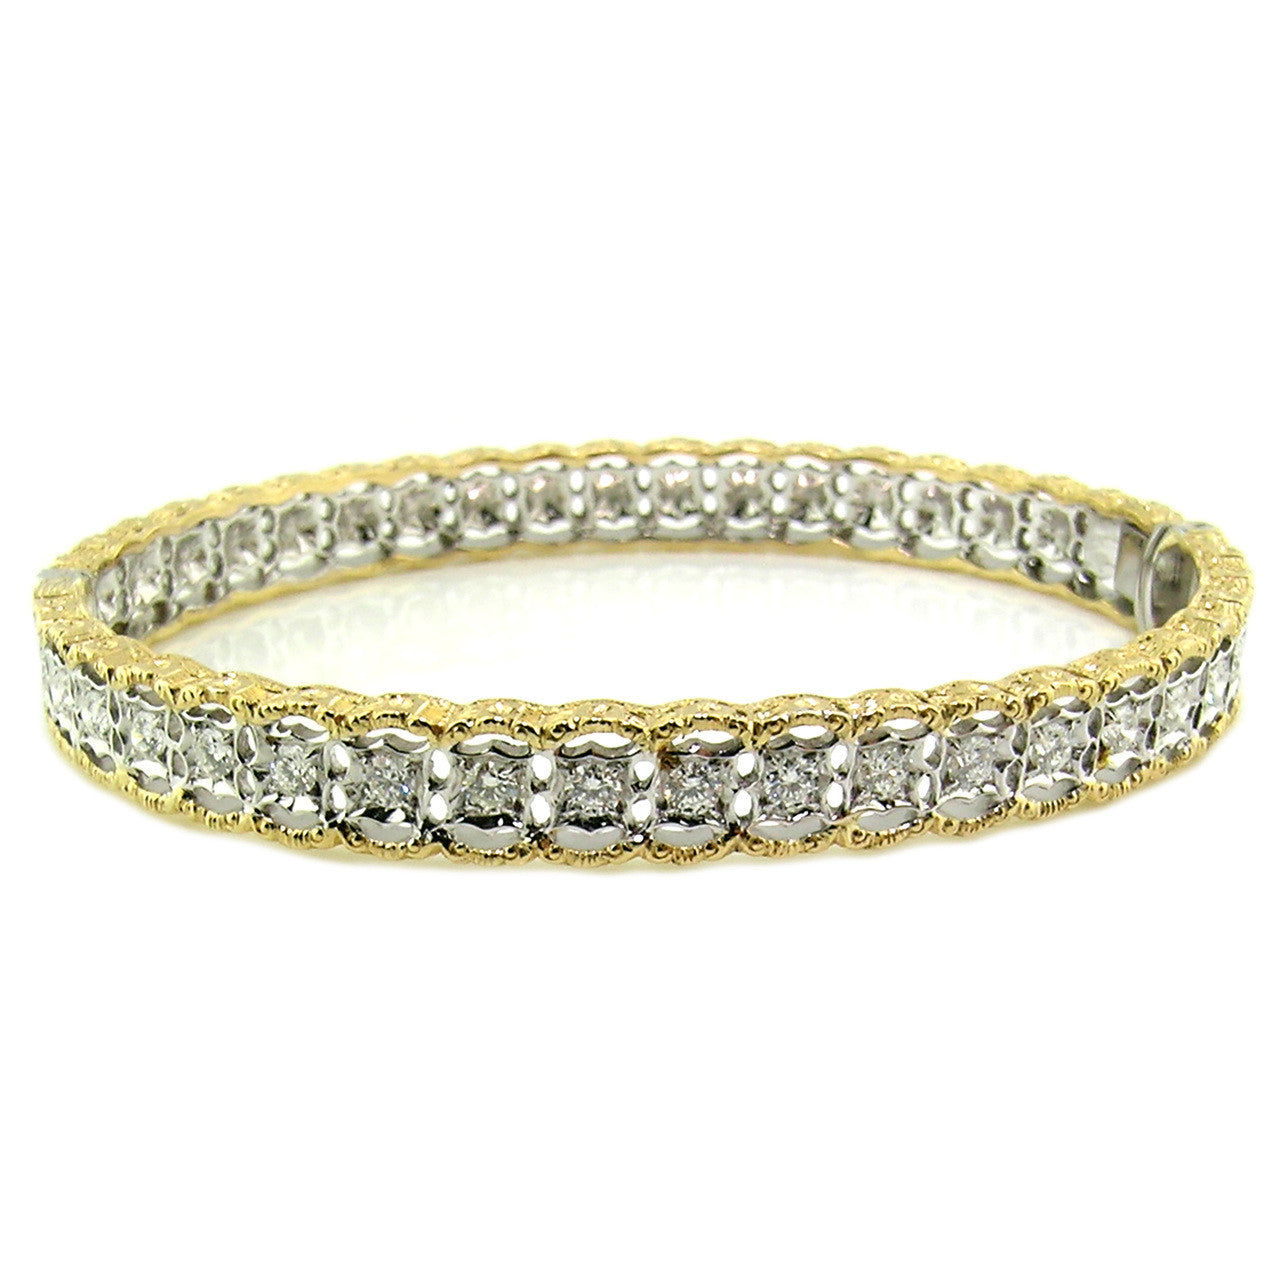 Stefania Florentine Engraved Diamond 18kt Bangle made in Italy for Cynthia Scott Jewelry